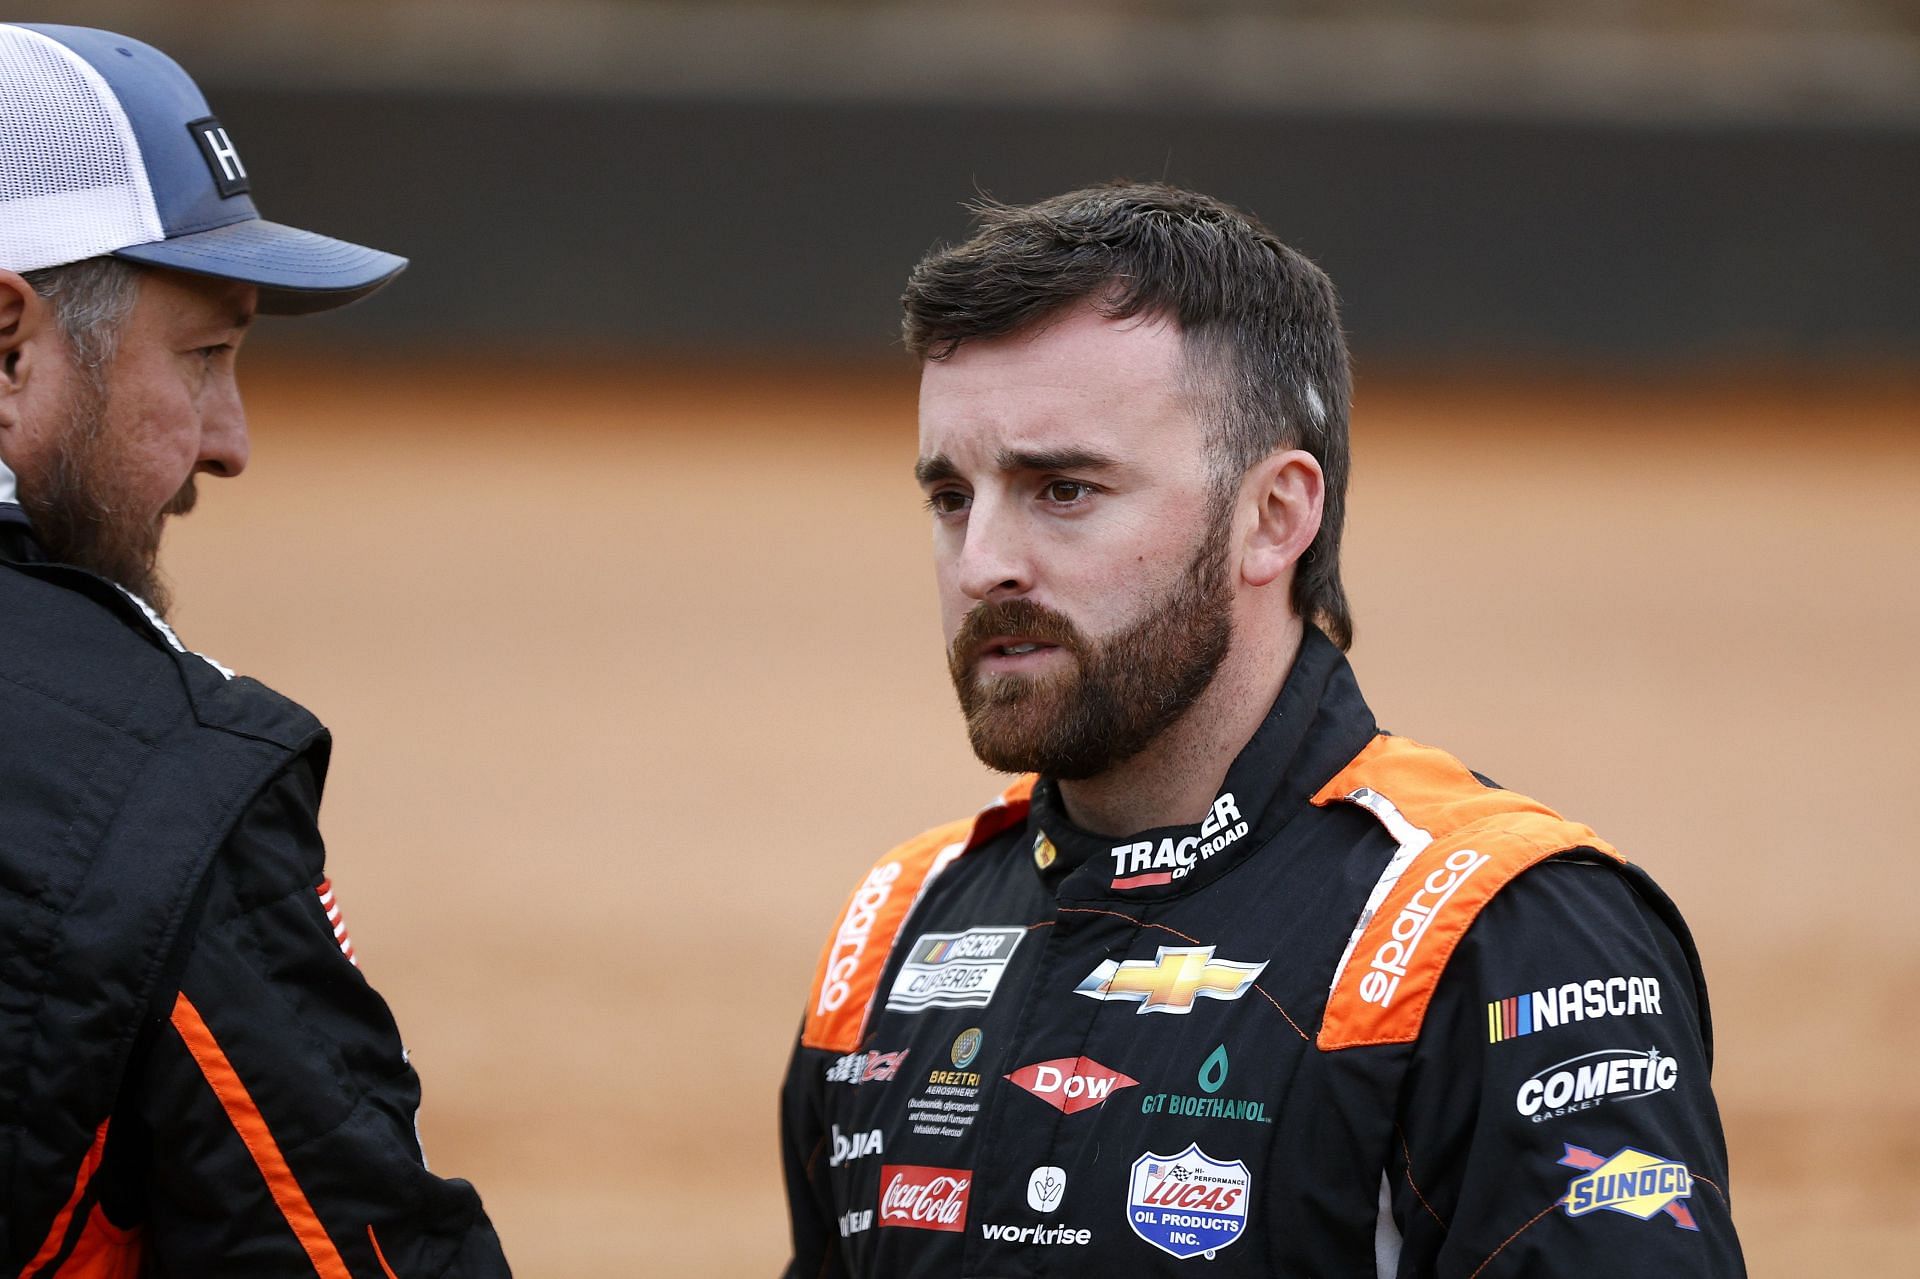 Austin Dillon speaks to a crew member before the 2022 NASCAR Cup Series Food City Dirt Race at Bristol Motor Speedway in Tennessee (Photo by Chris Graythen/Getty Images)